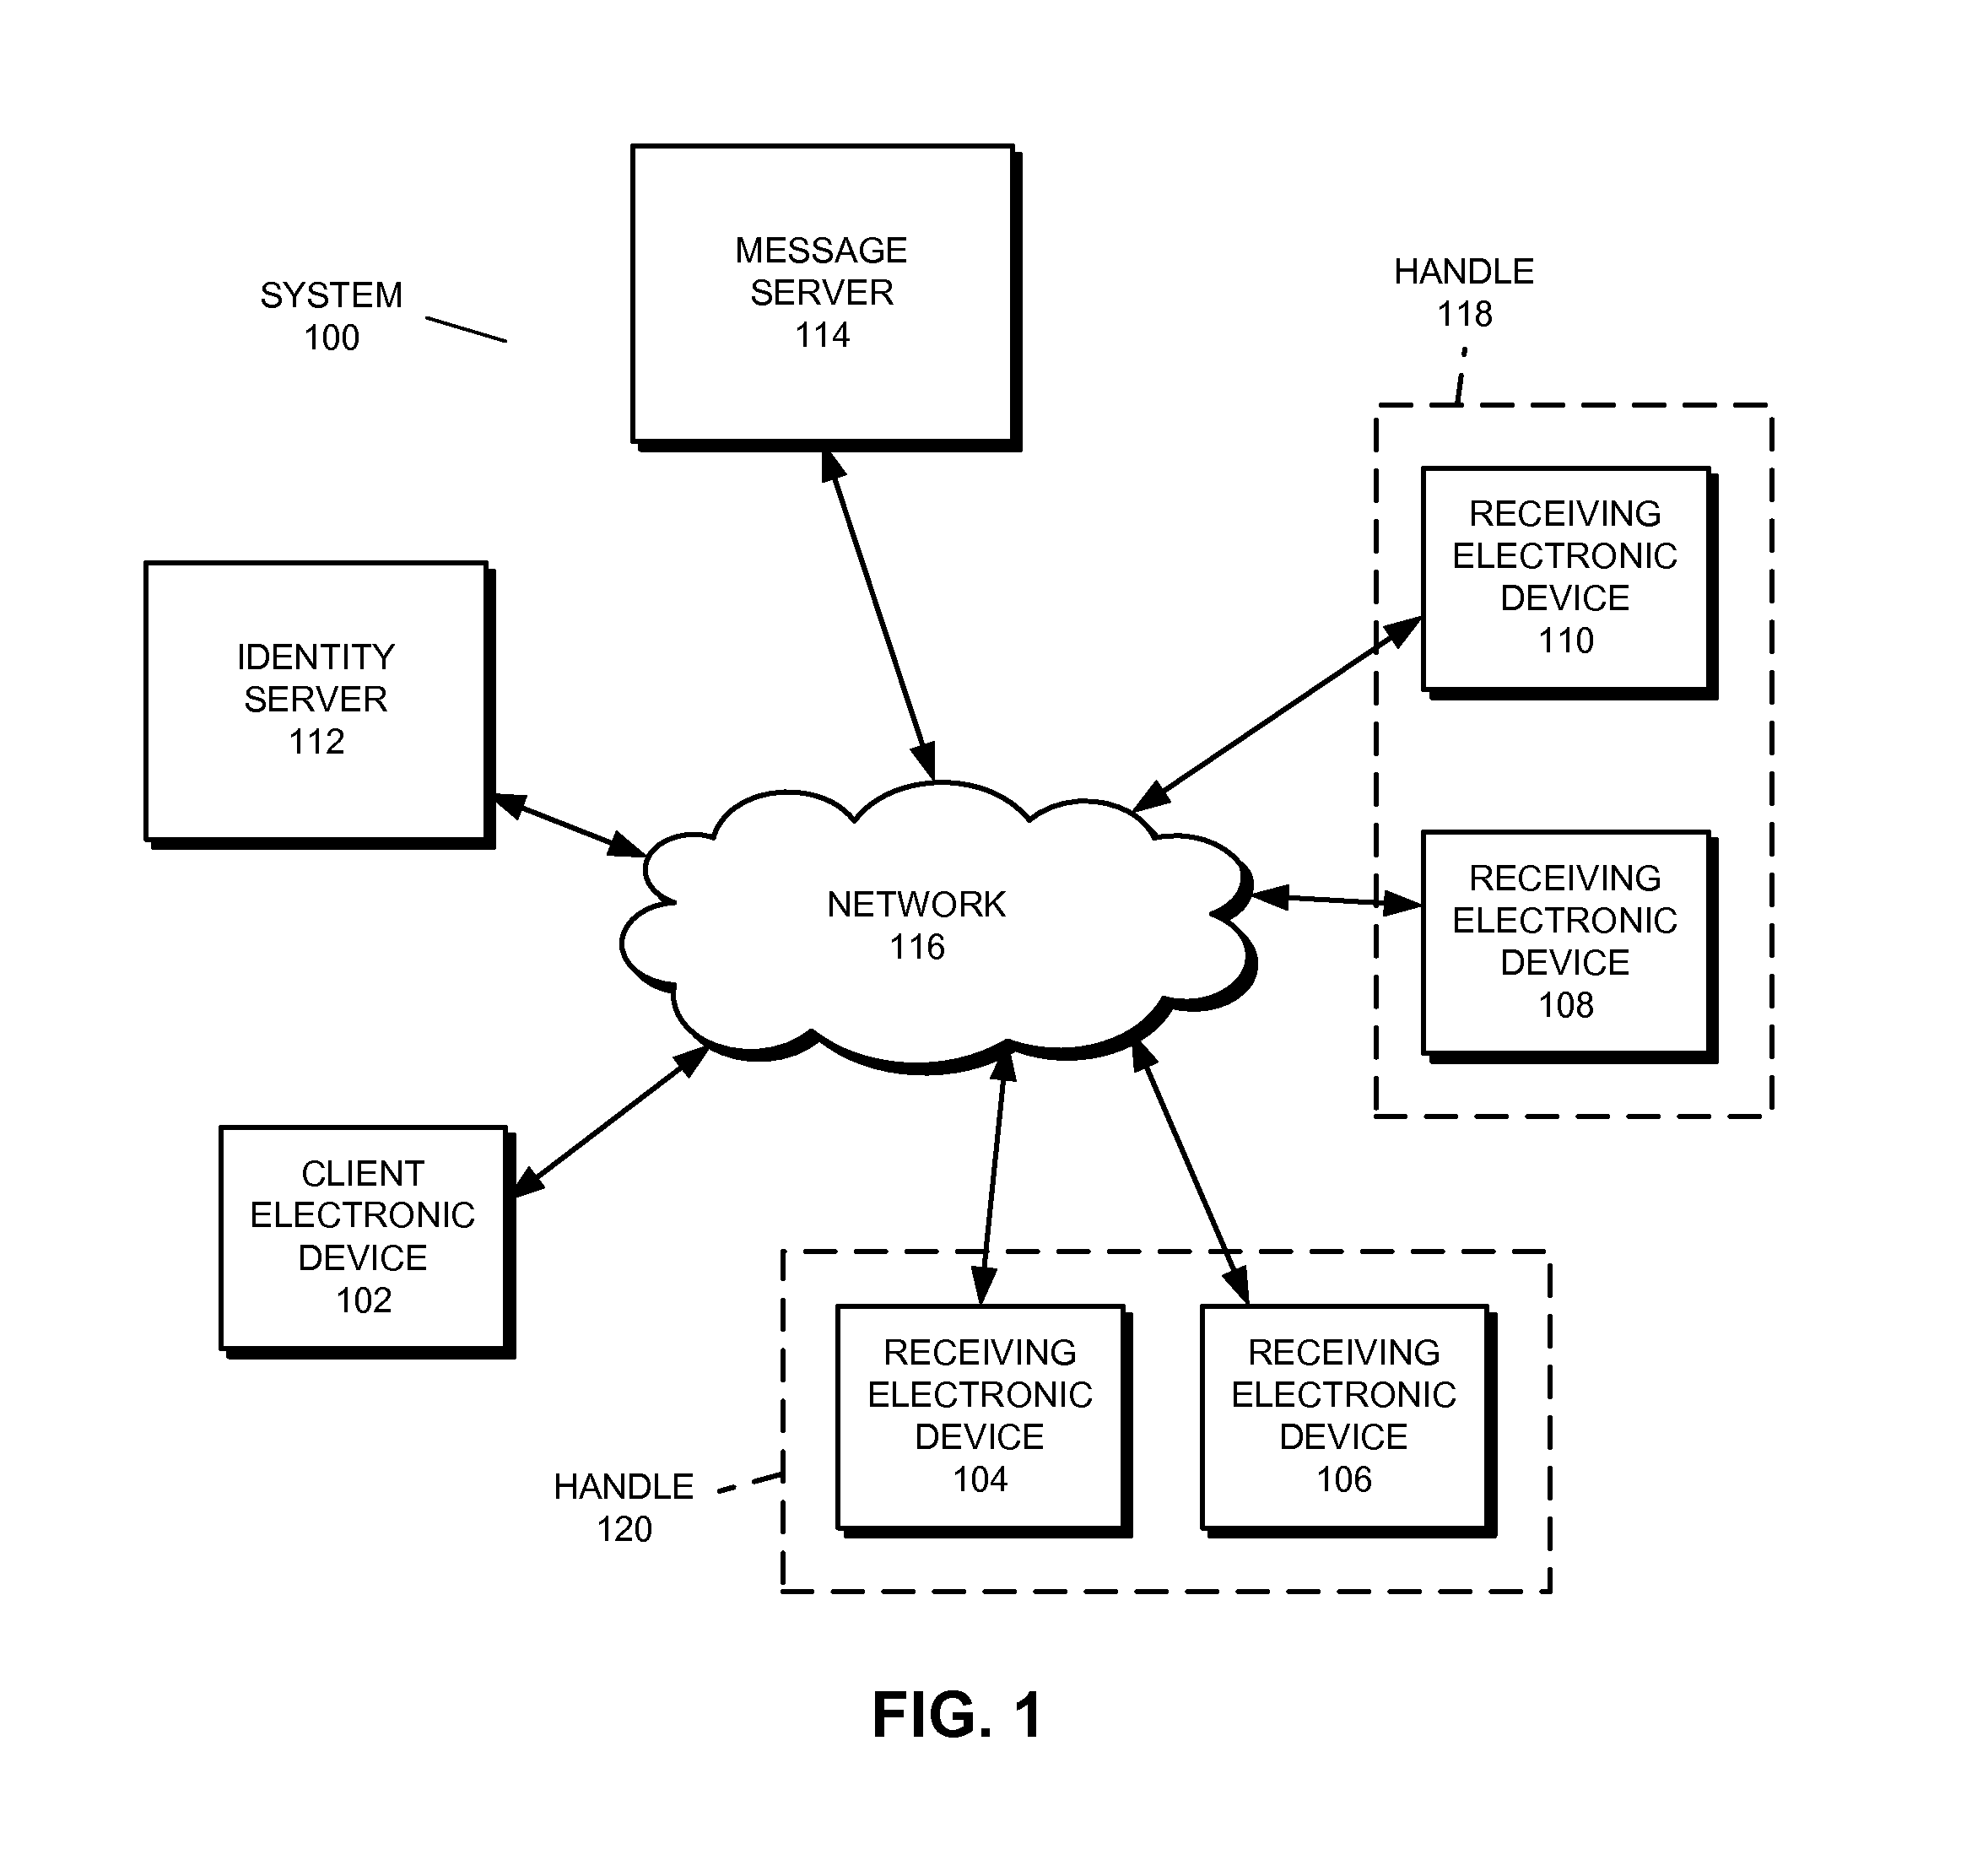 Sending messages to multiple receiving electronic devices using a message server